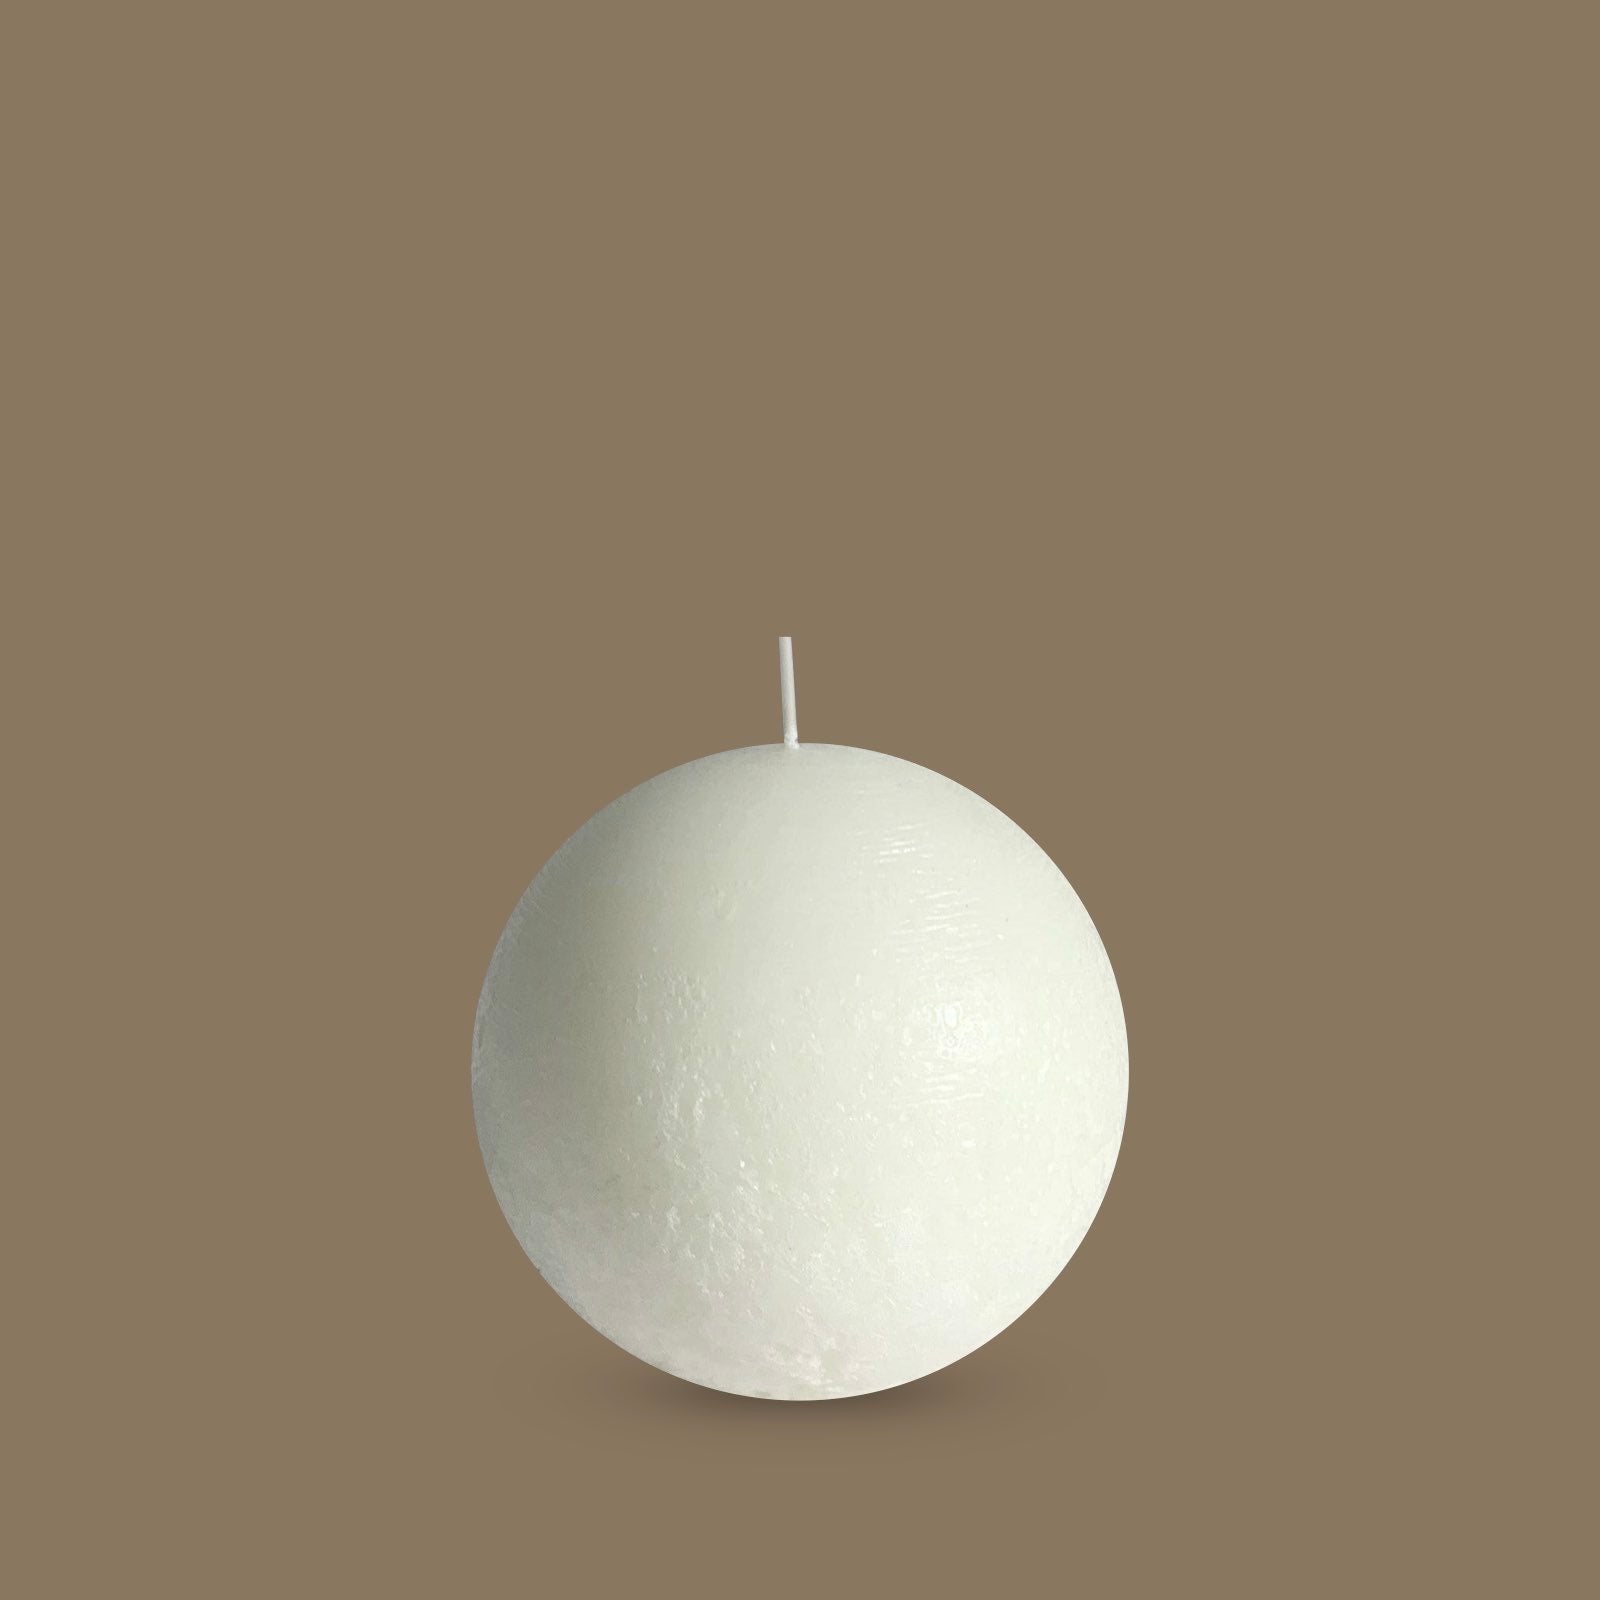 Rustic white ball candle